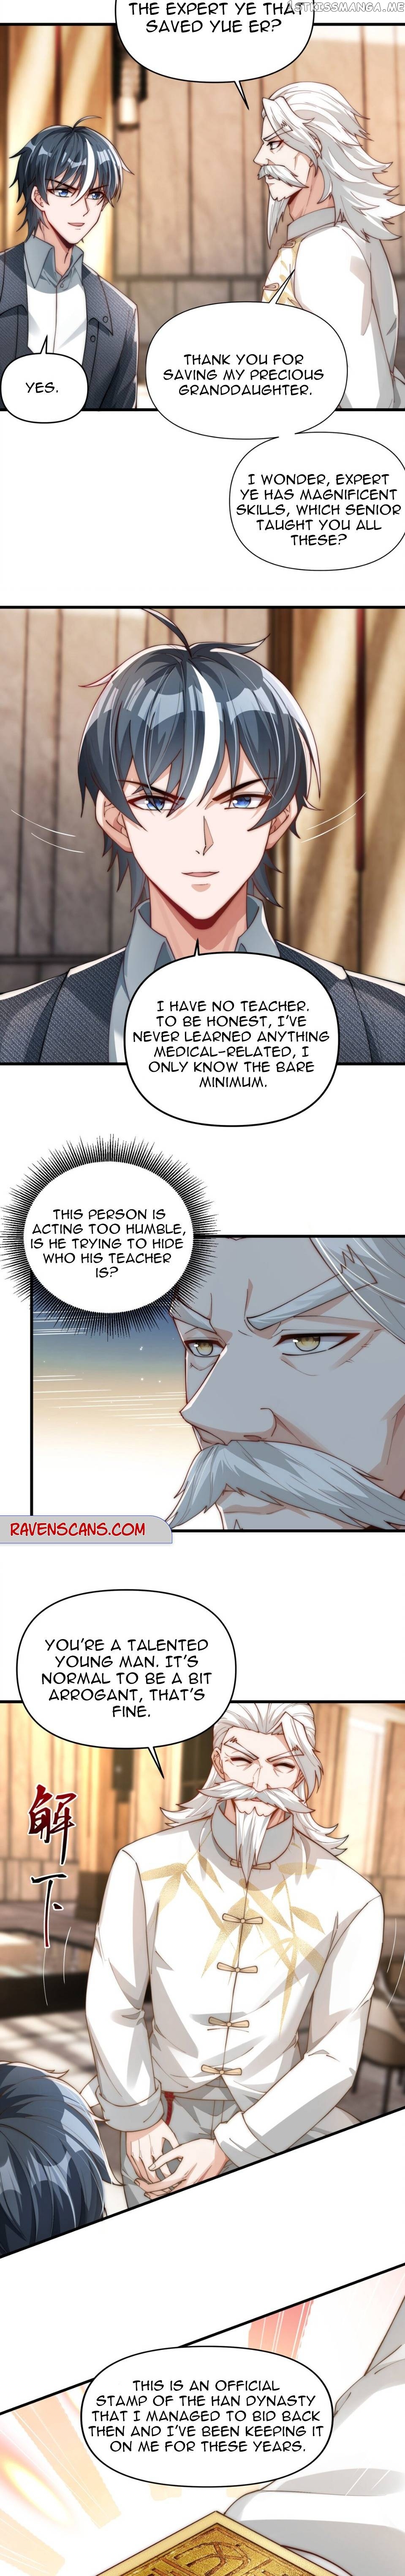 Rebirth of the First Urban Immortal Emperor Ch.13 Page 2 - Mangago